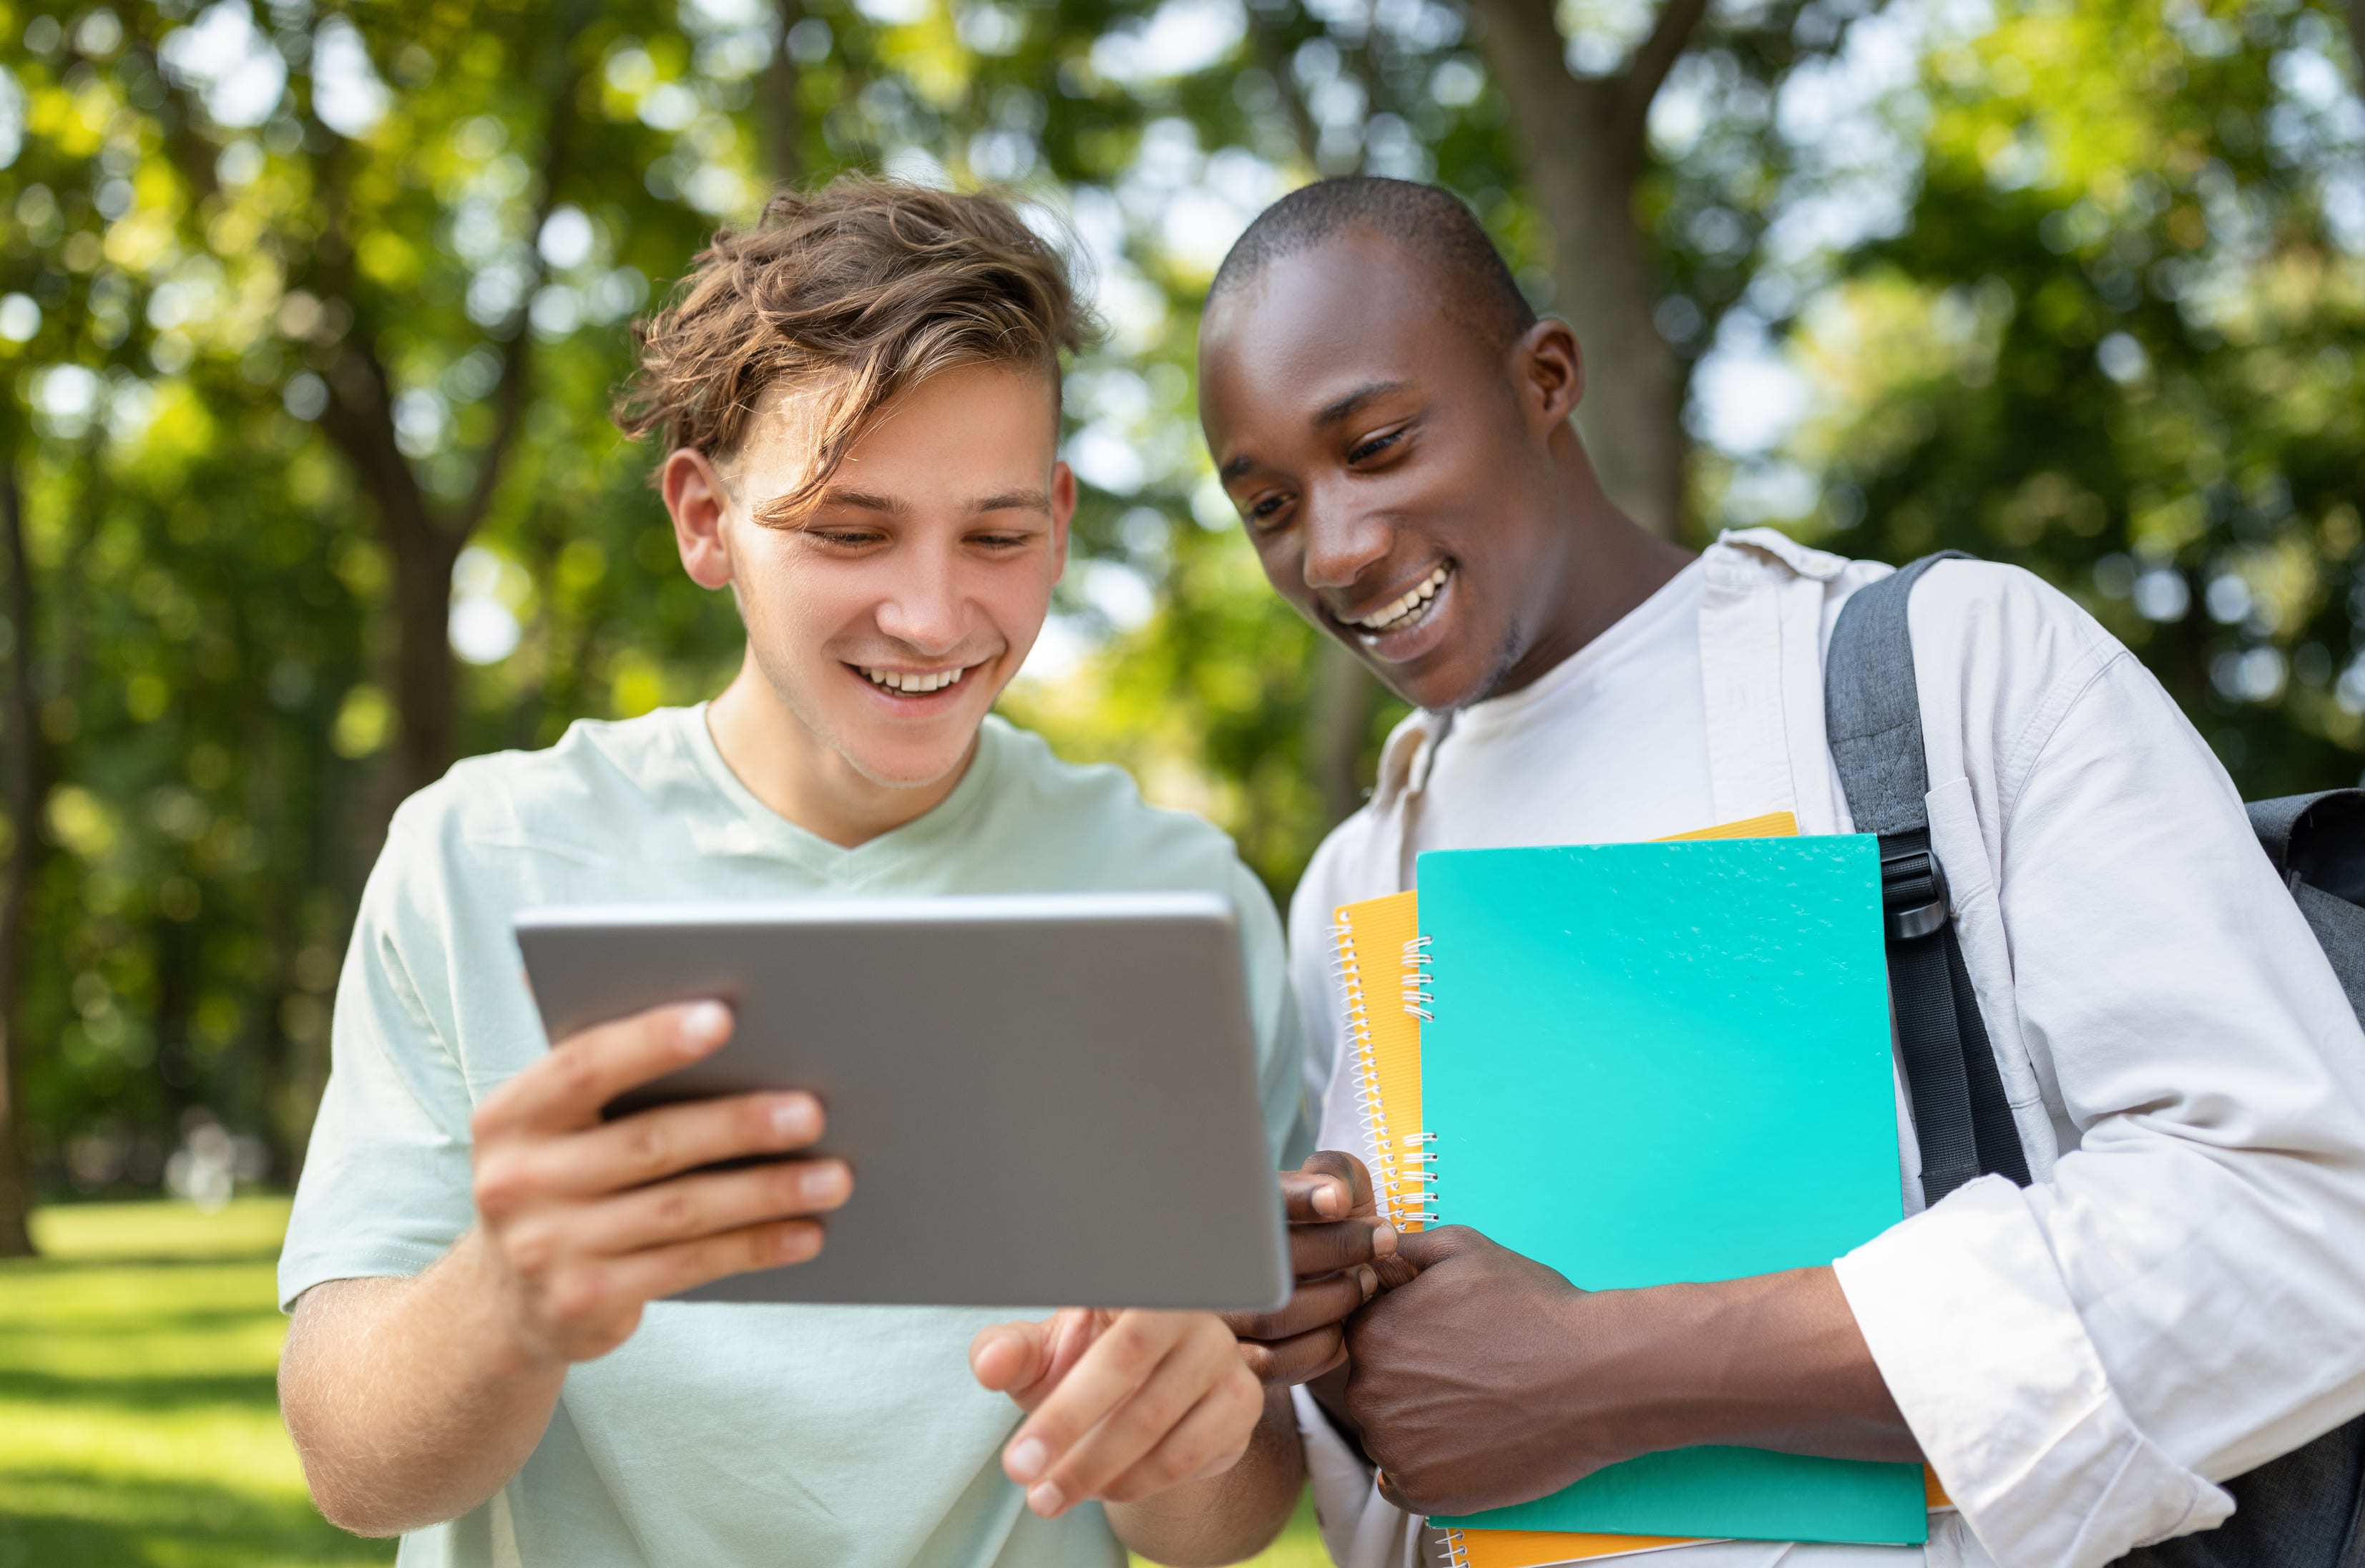 Two student smiling at an electronic tablet